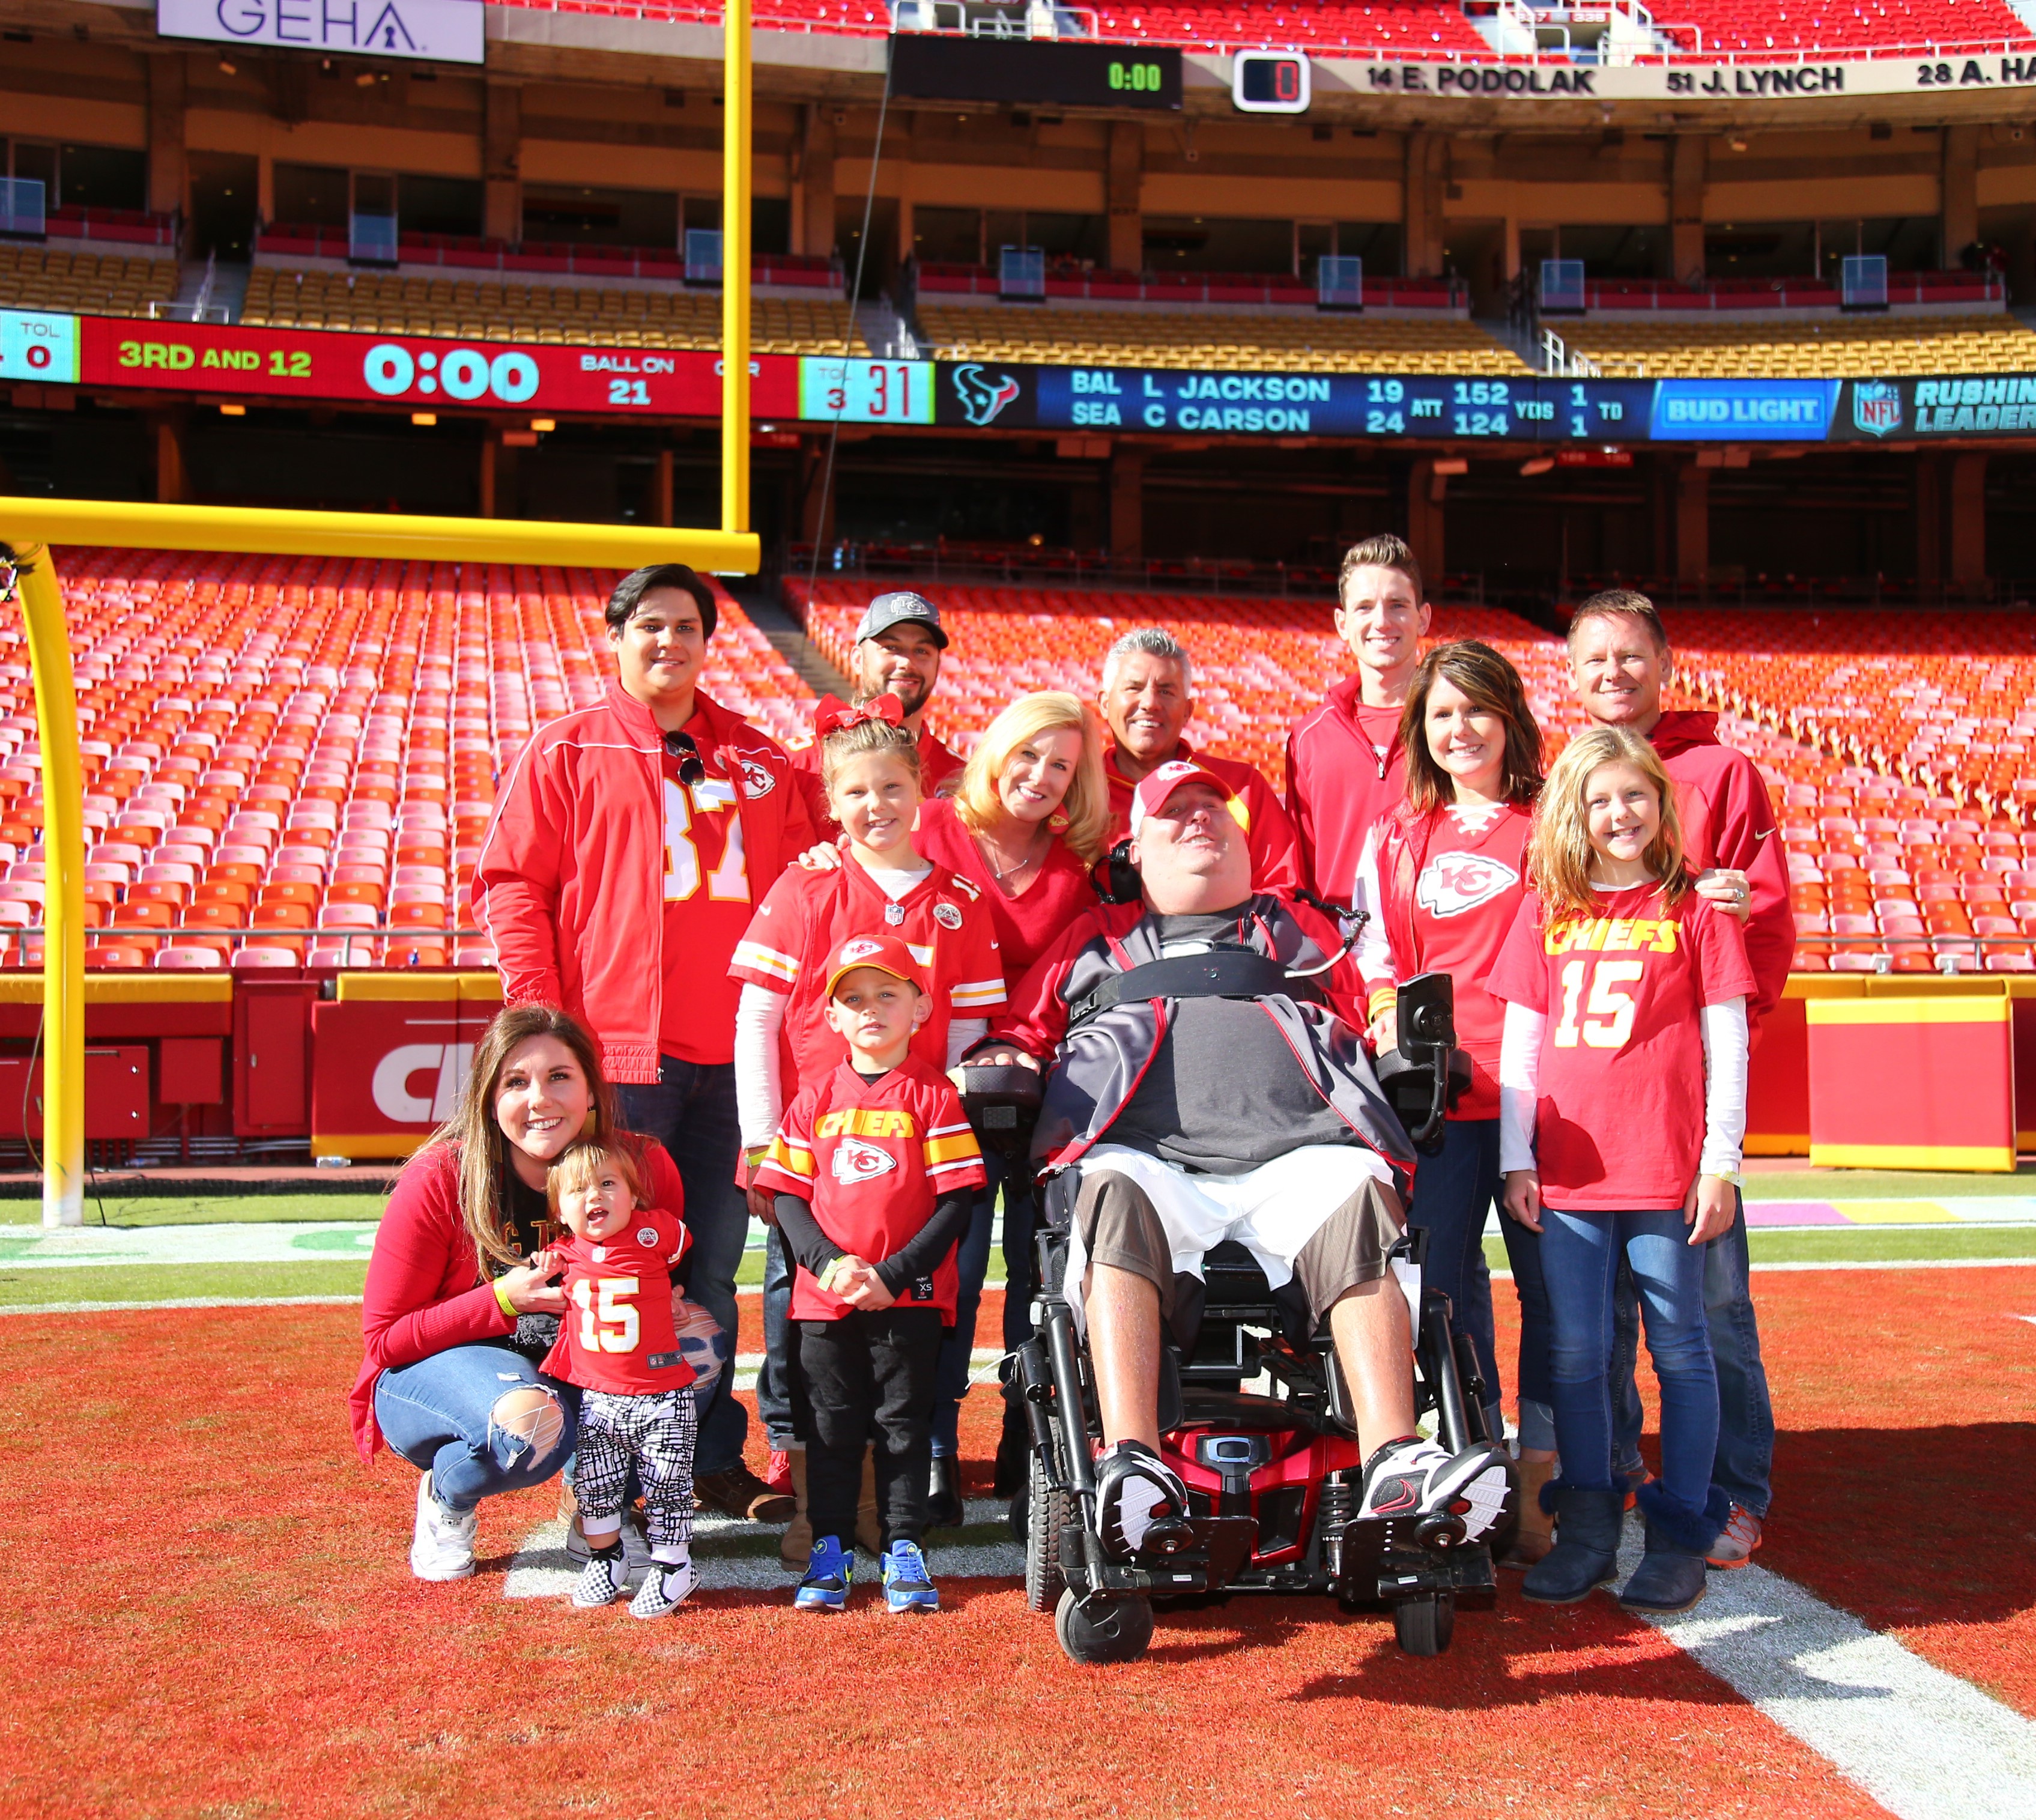 The Baier family (13 people) on the football field at Arrowhead Stadium. They are smiling and wearing red Kansas City Chiefs shirts.